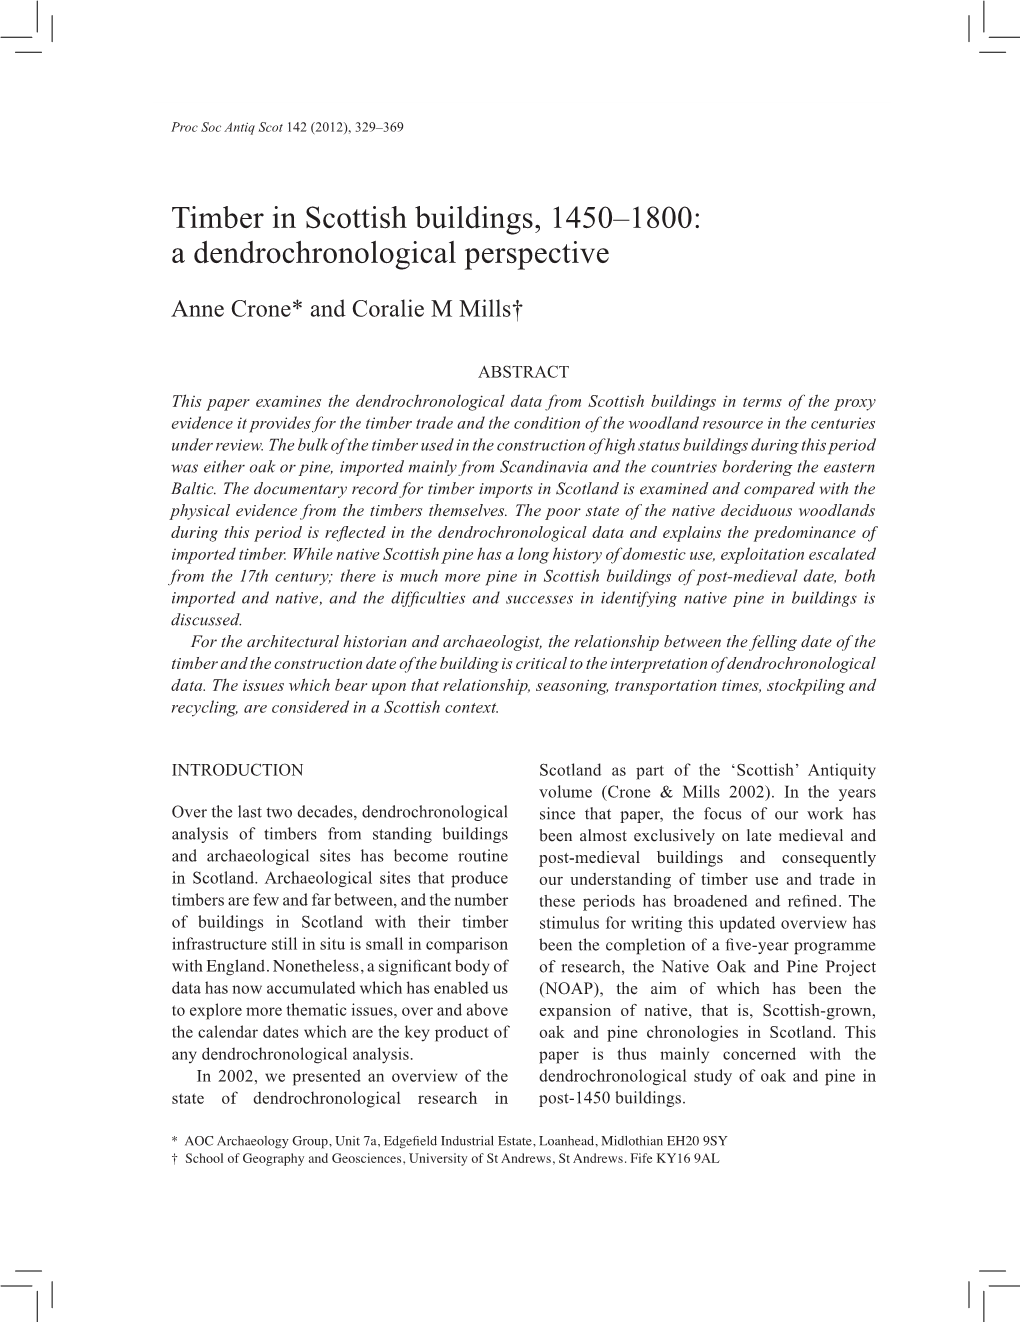 Timber in Scottish Buildings, 1450–1800: a Dendrochronological Perspective